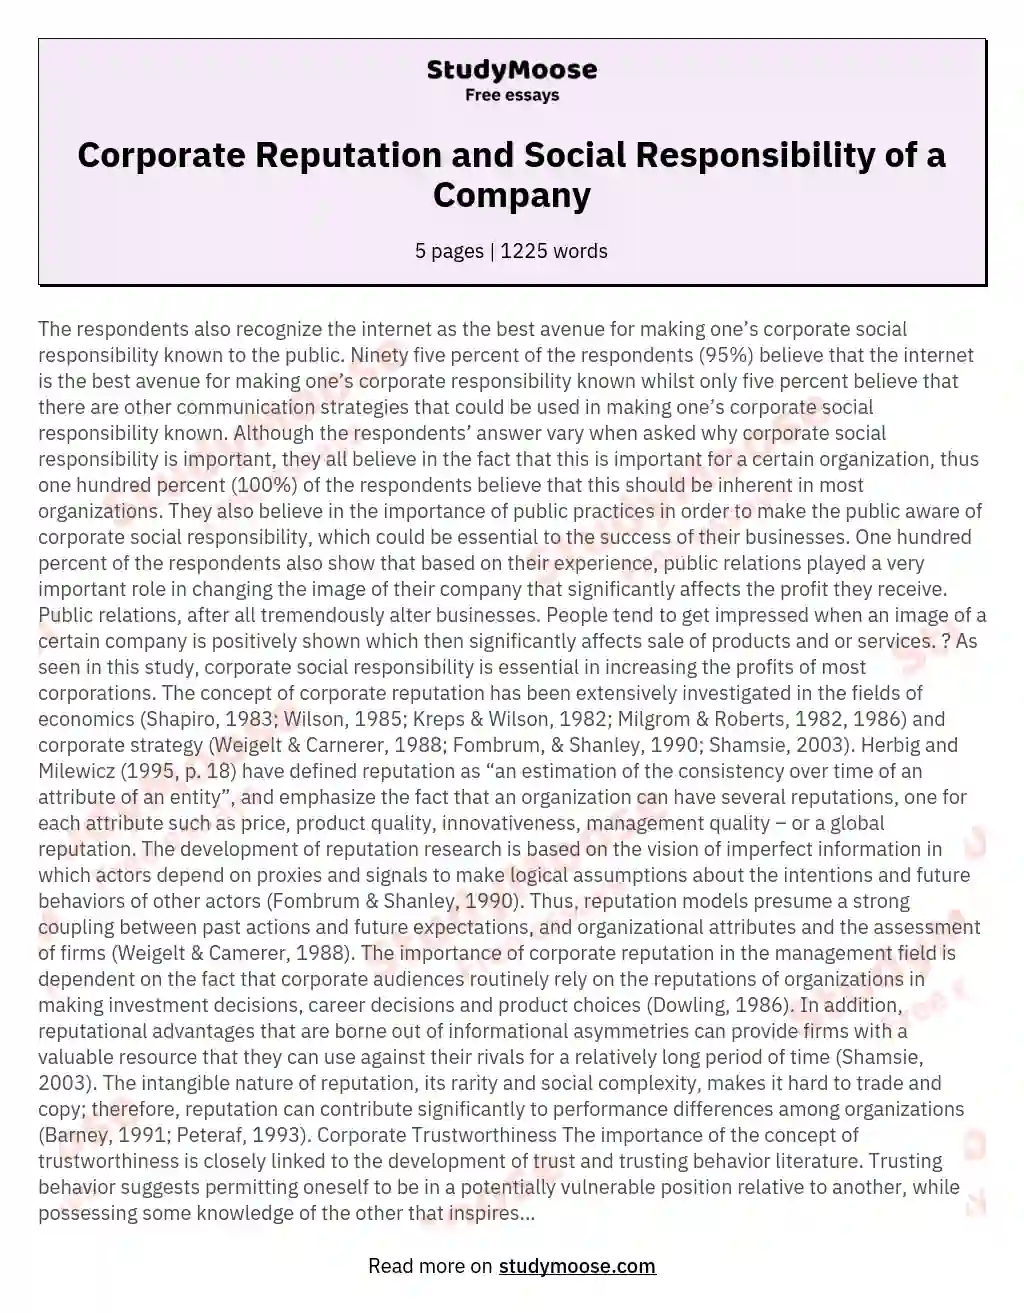 Corporate Reputation and Social Responsibility of a Company essay